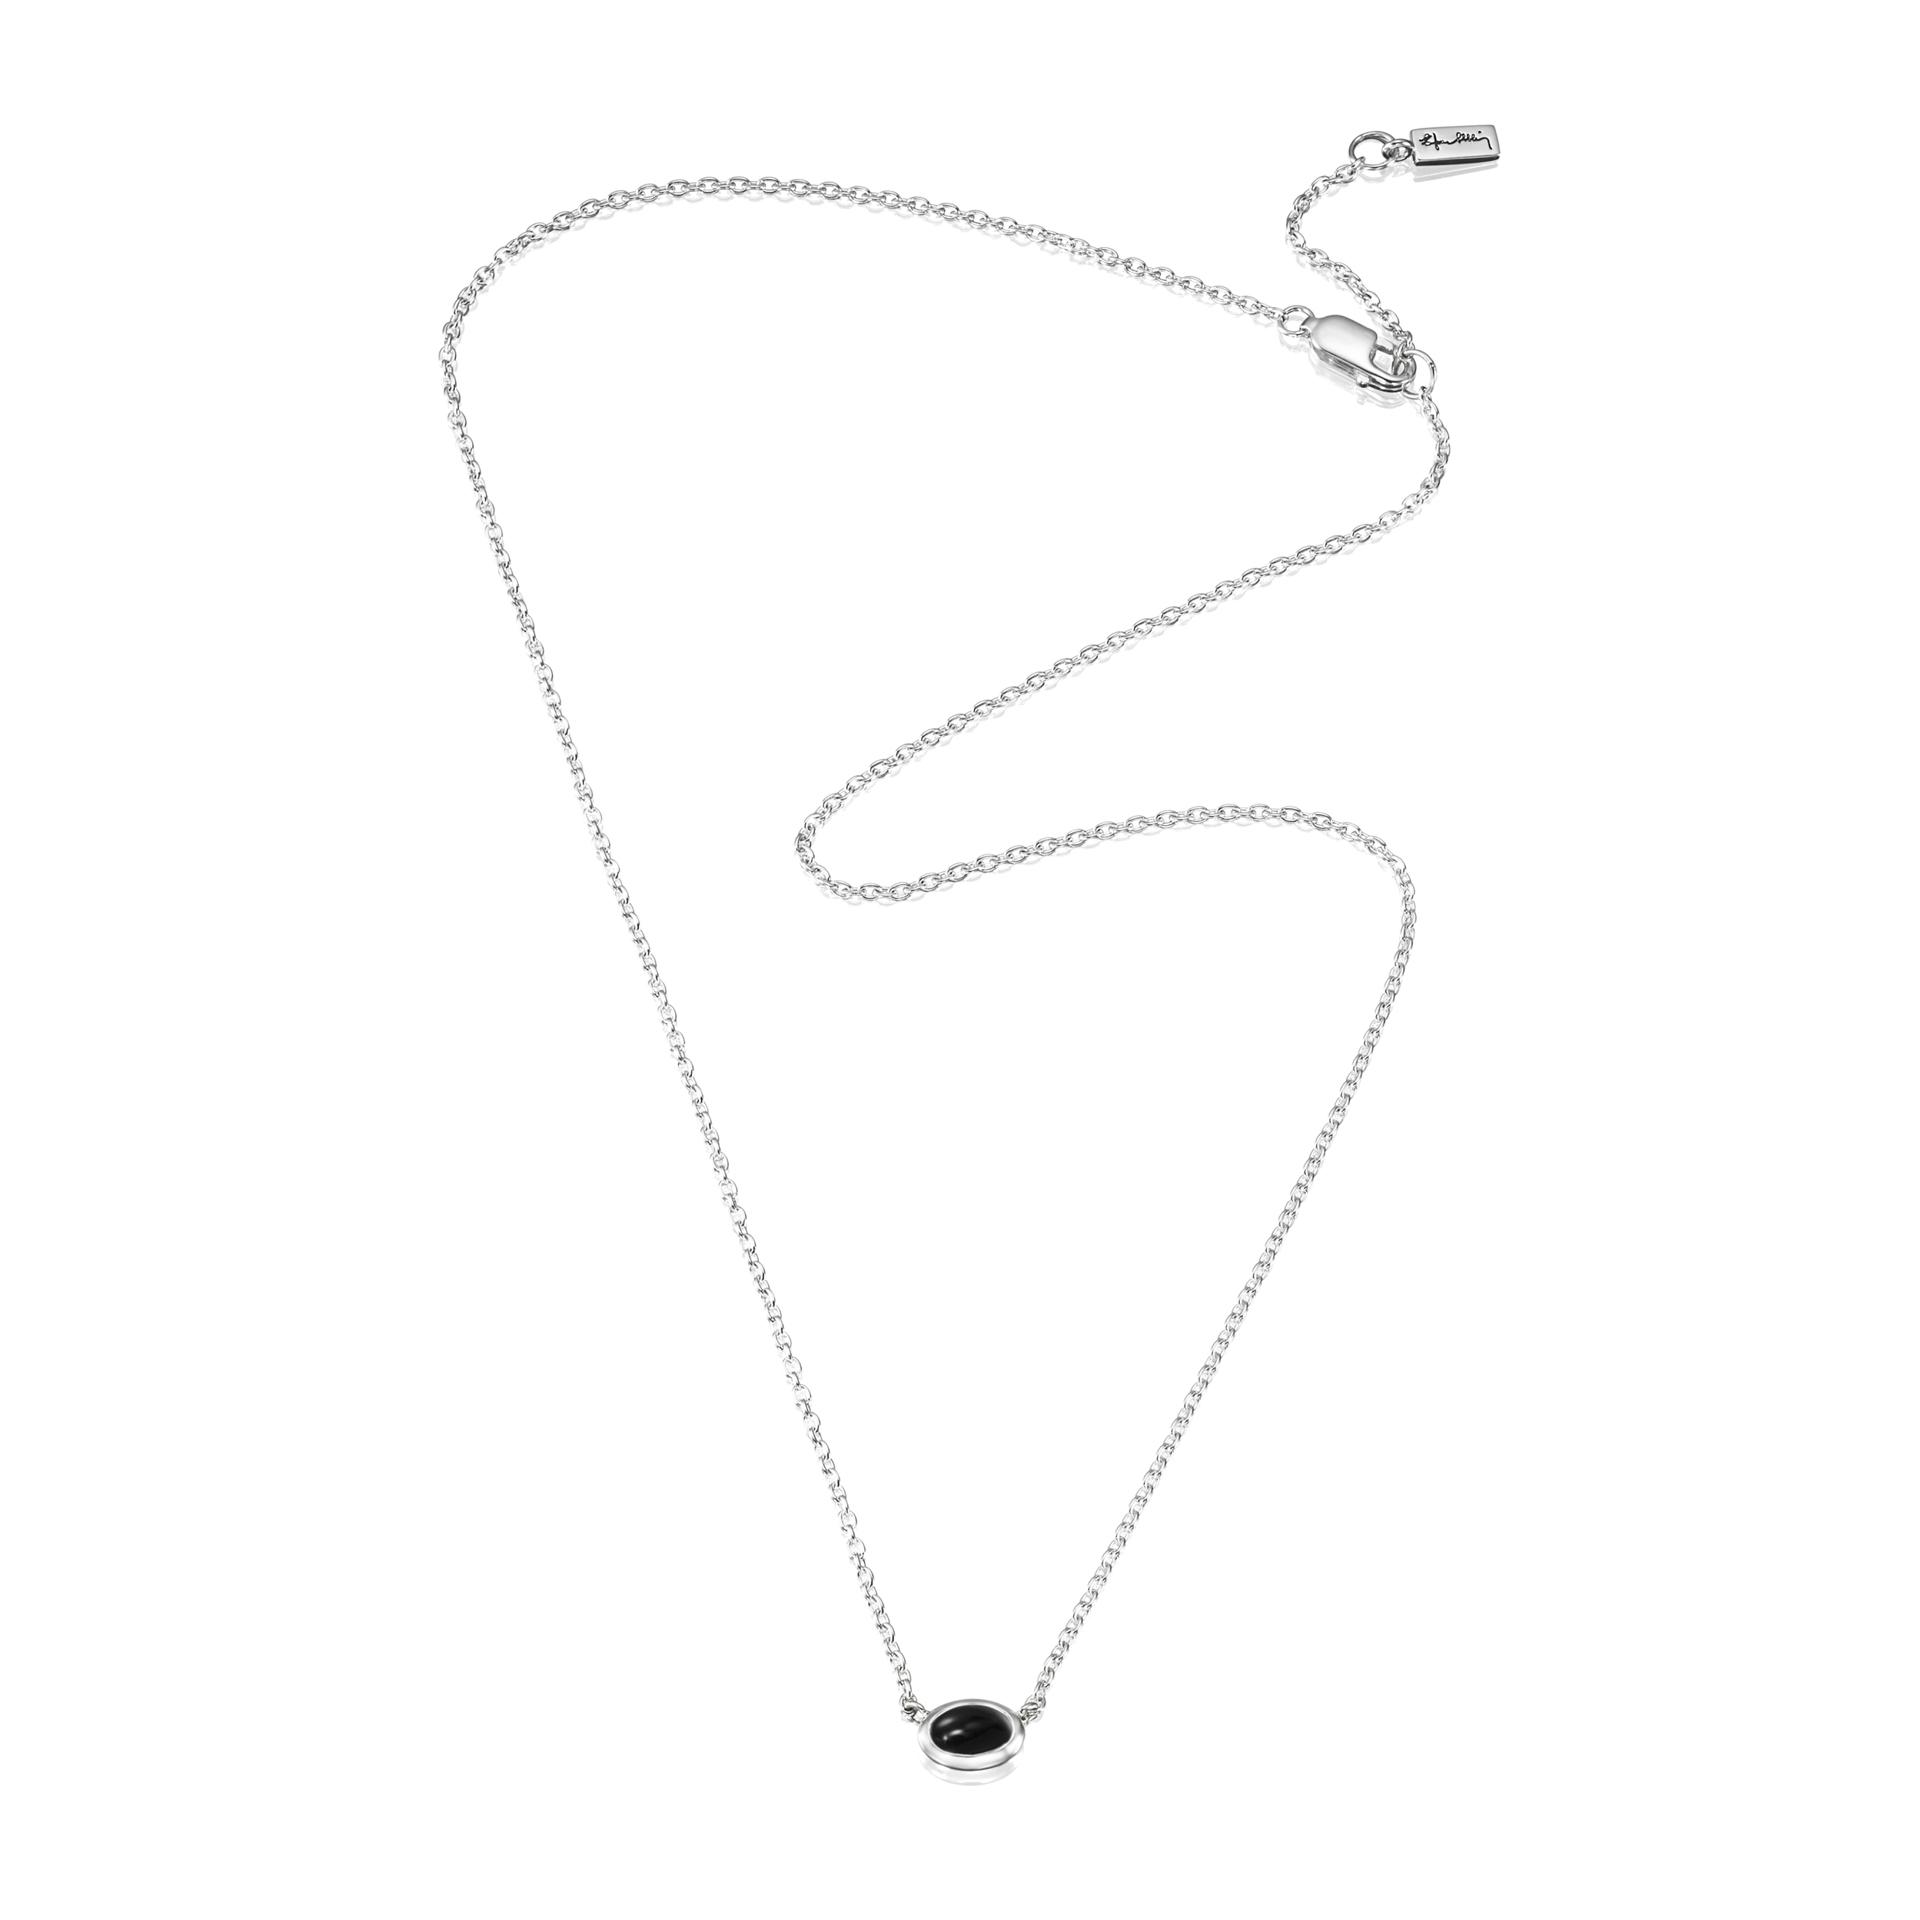 LOVE BEAD NECKLACE SILVER - ONYX